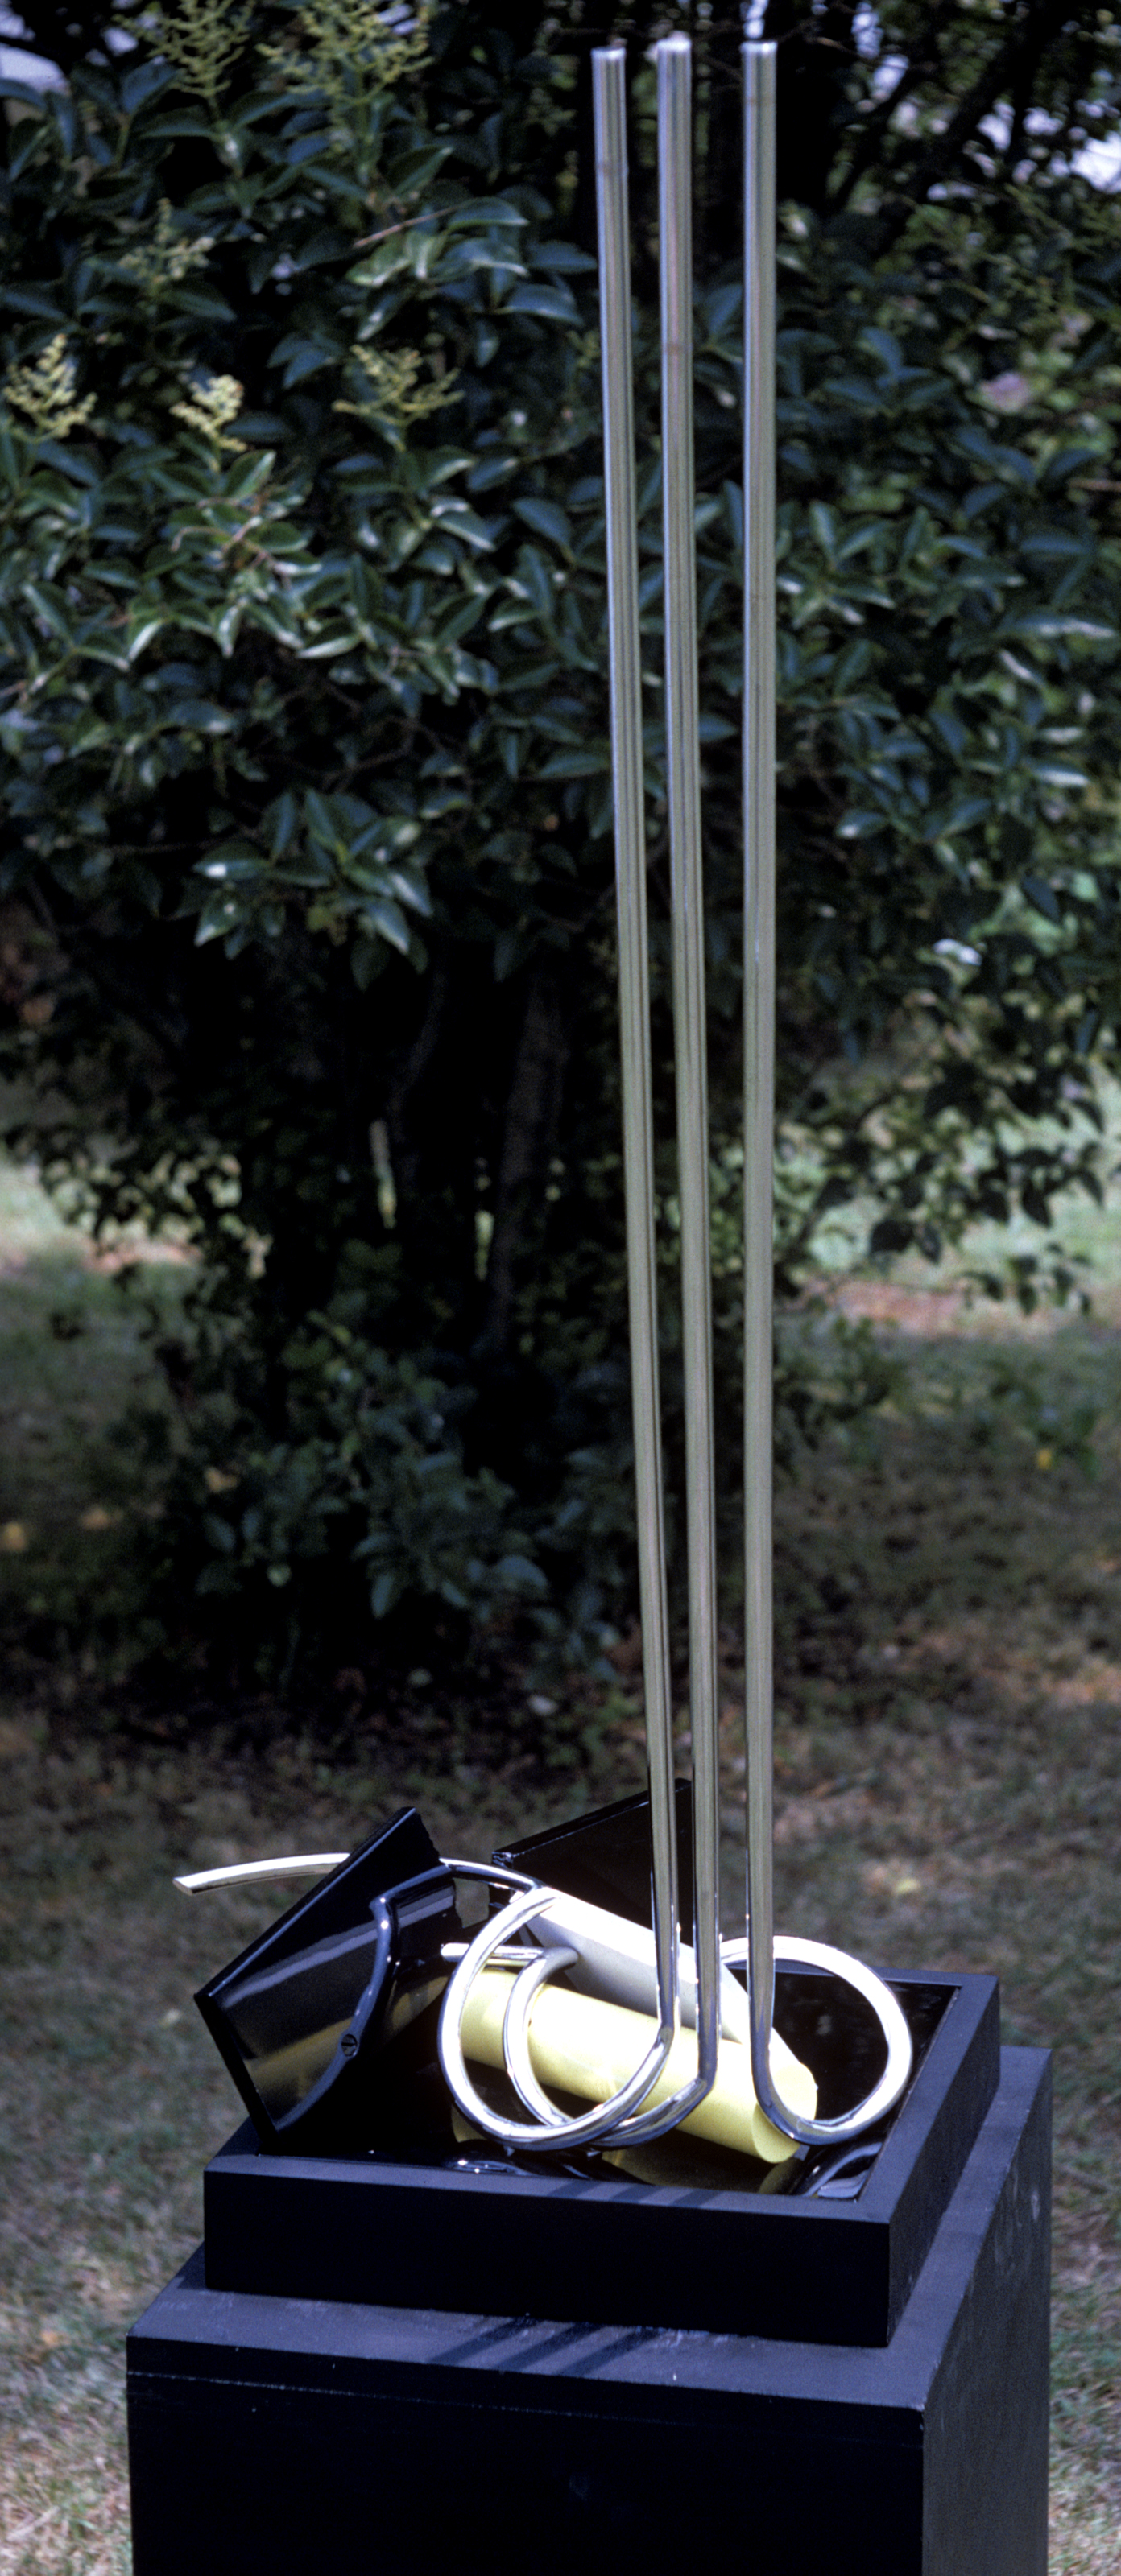 6  Untitled  40X24X20  chrome and painted steel.jpg